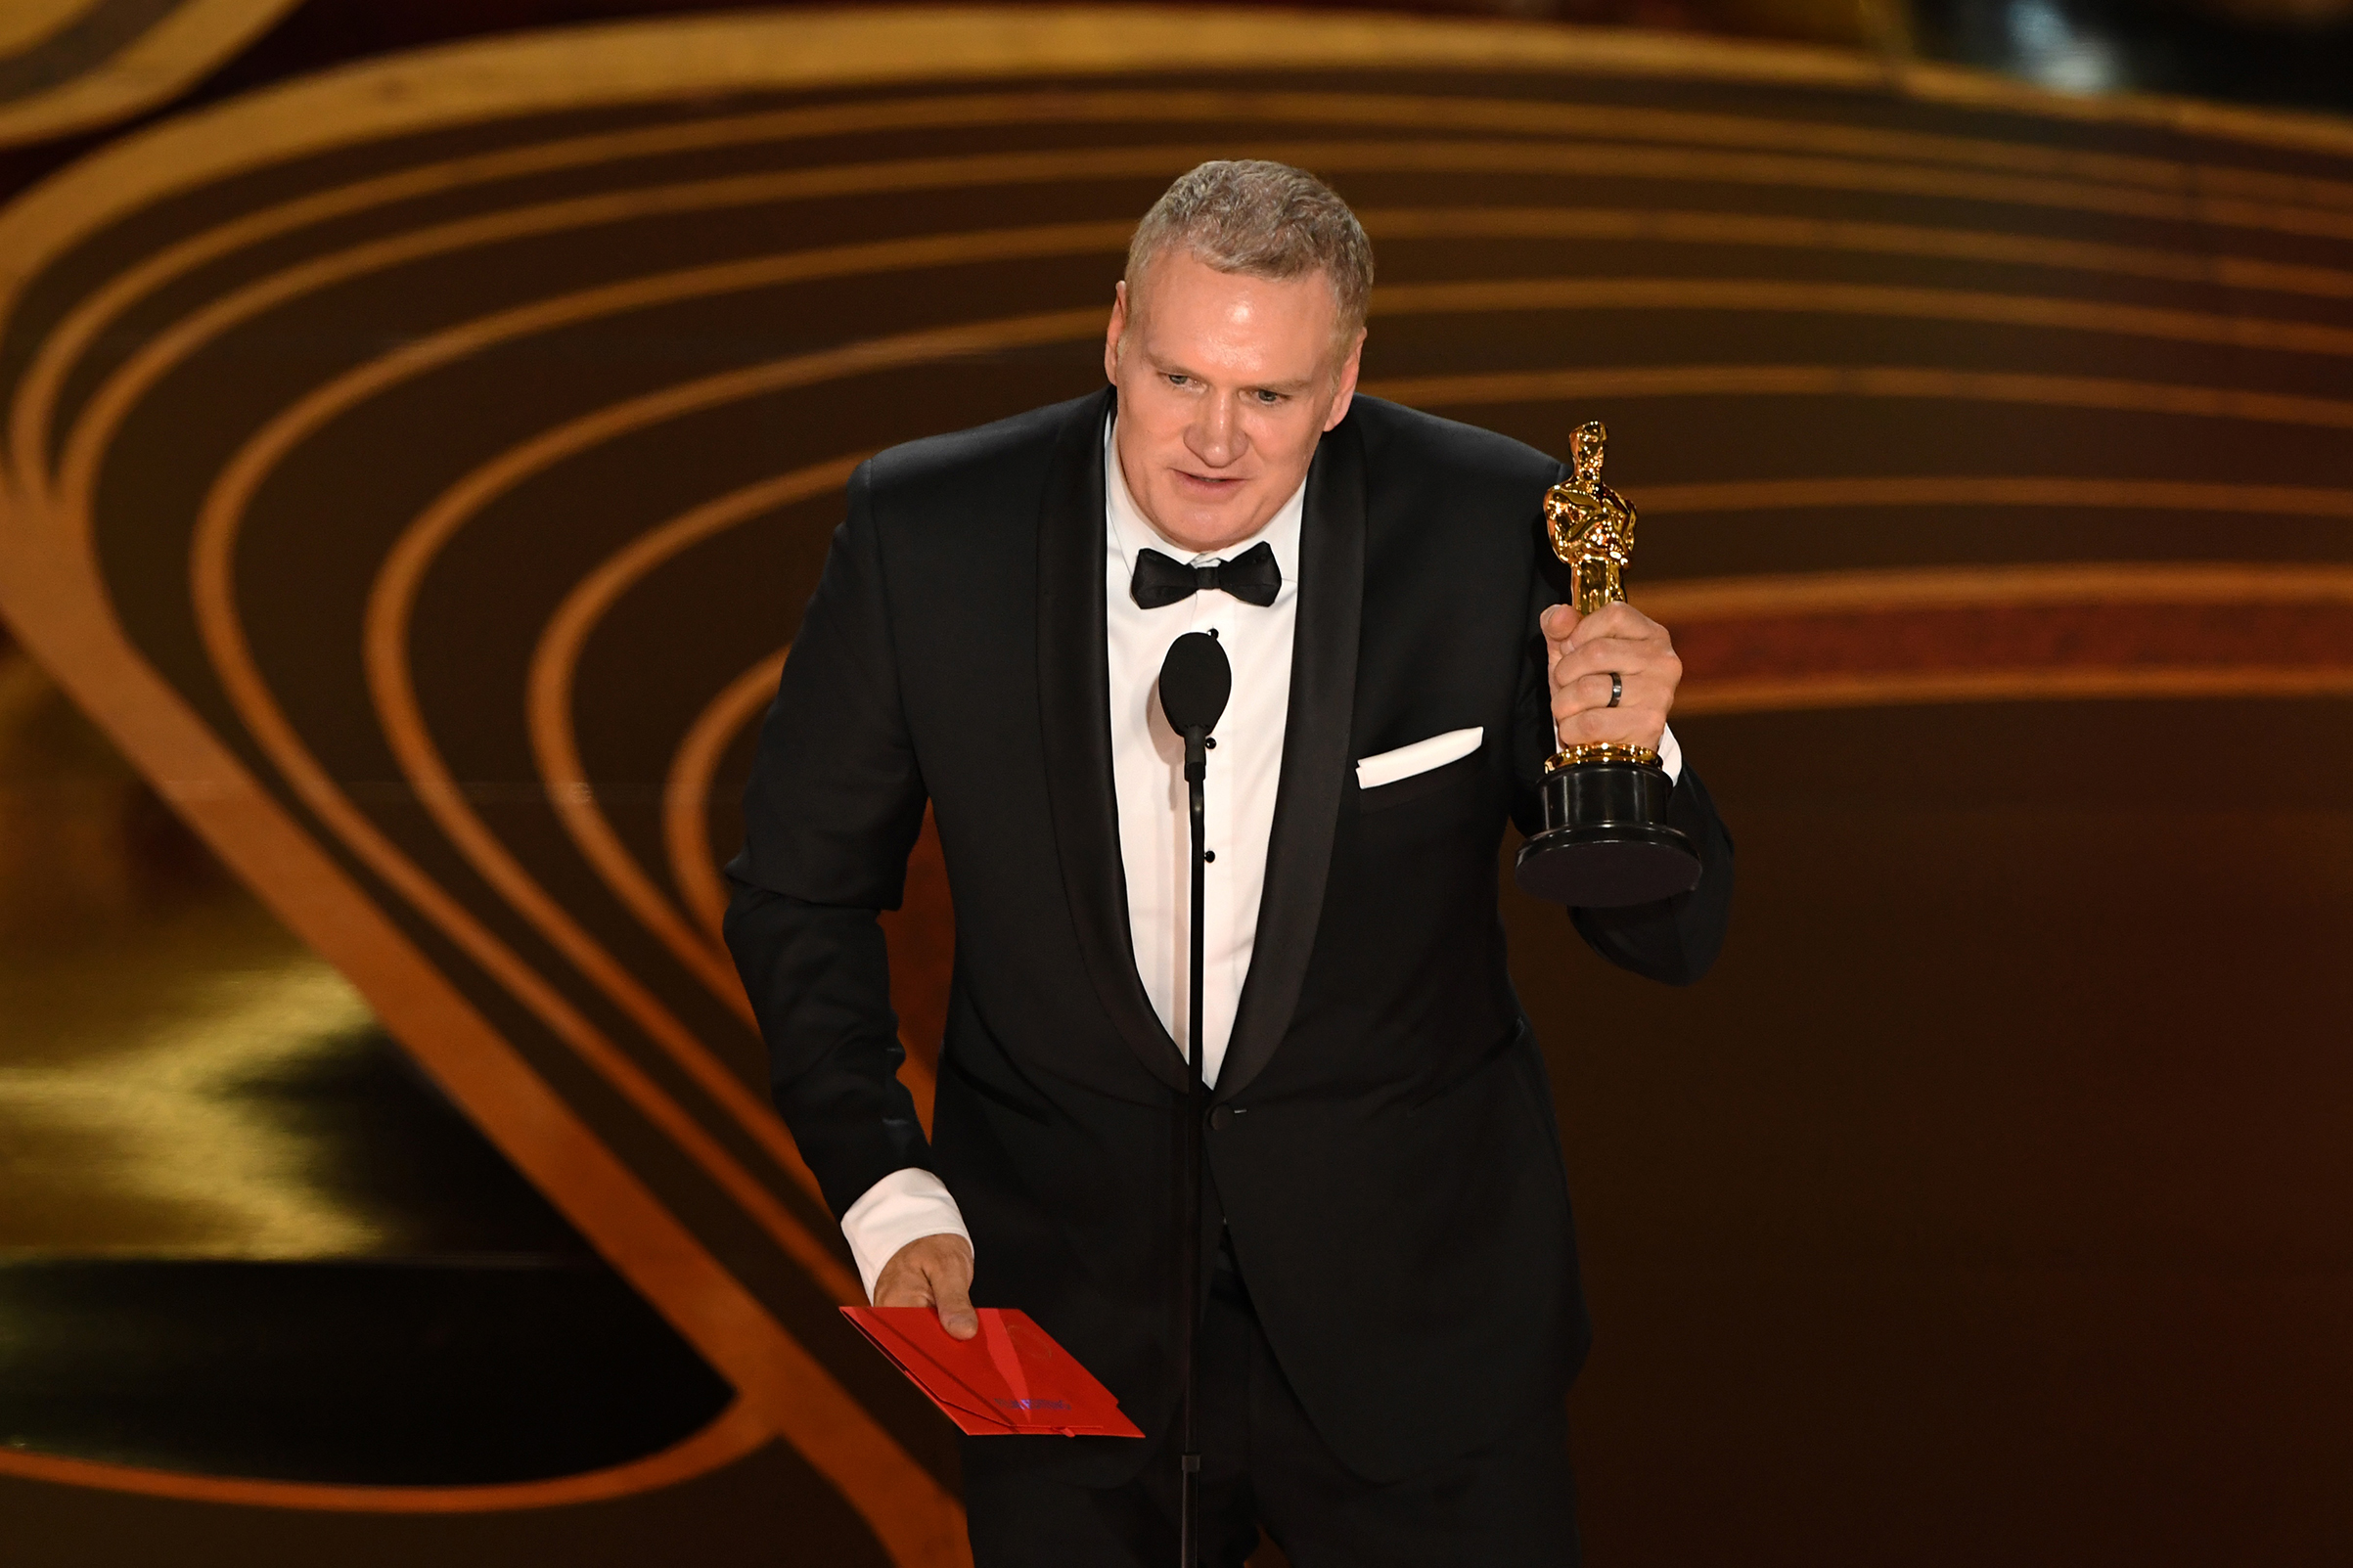 Best Film Editing nominee for "Bohemian Rhapsody" John Ottman accepts the award for Best Film Editing during the 91st Annual Academy Awards at the Dolby Theatre in Hollywood on Feb. 24, 2019. (Valerie Macon—AFP/Getty Images)